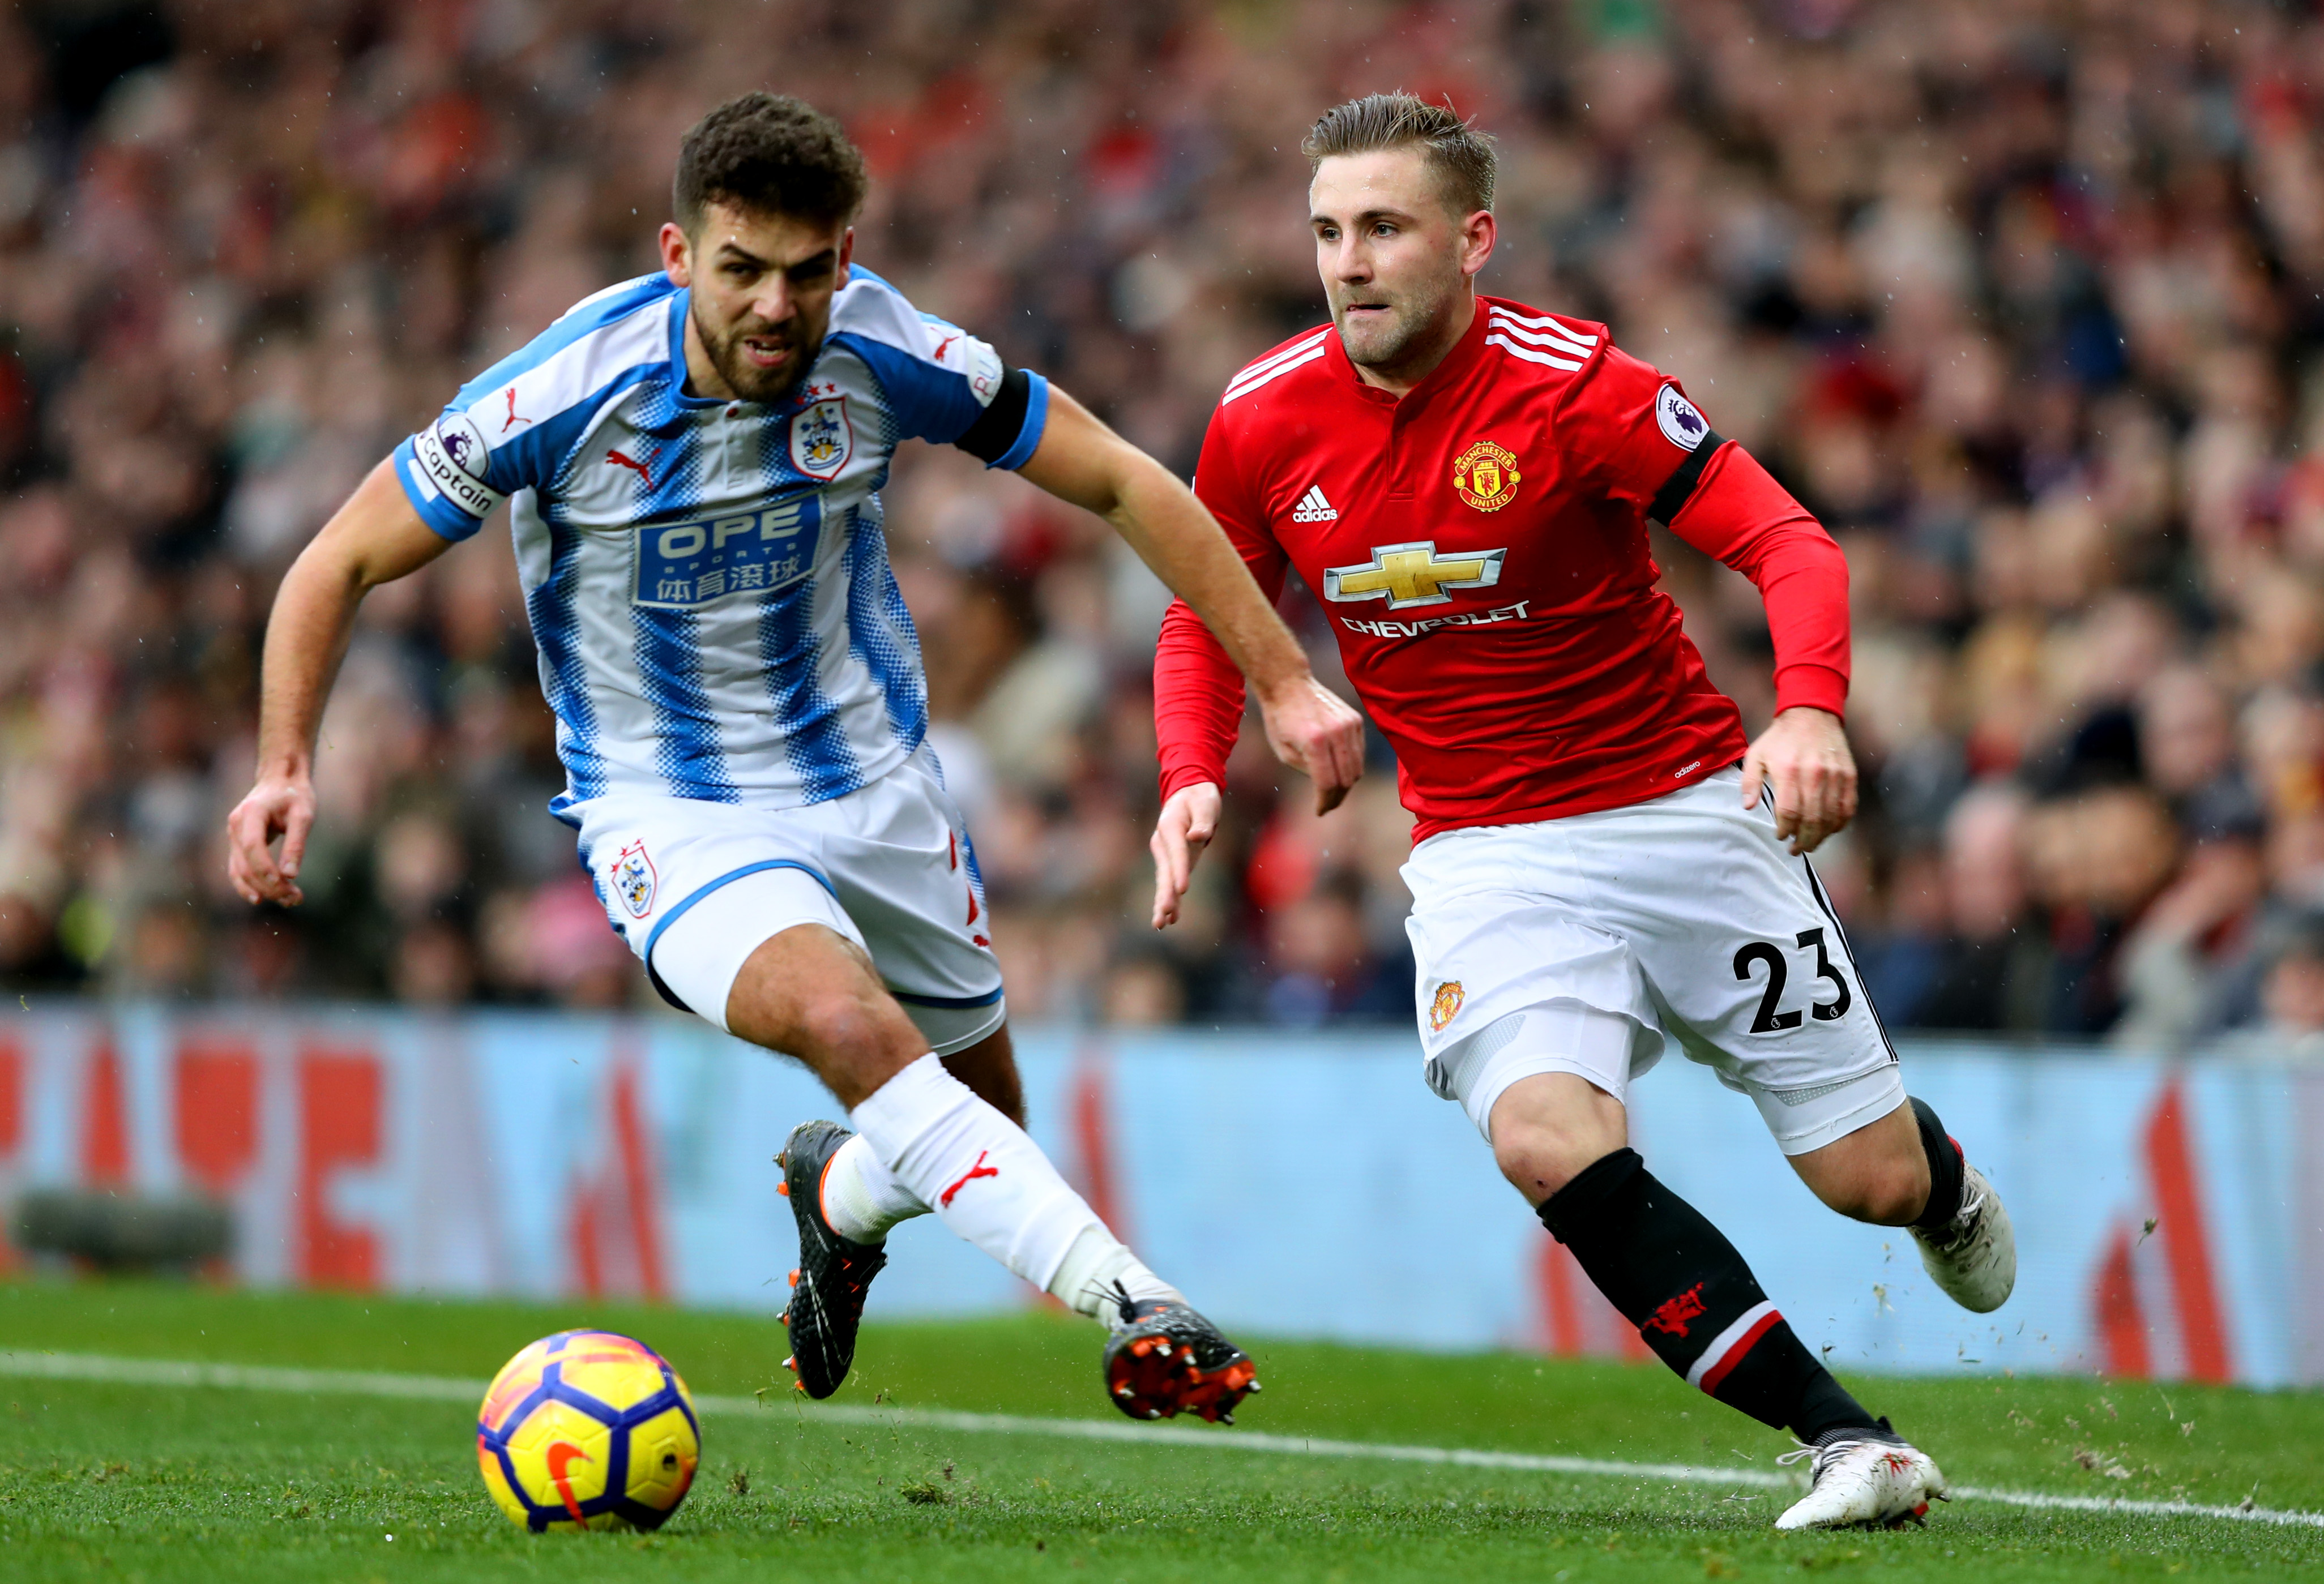 Luke Shaw (r) competes with Huddersfield's Tommy Smith.